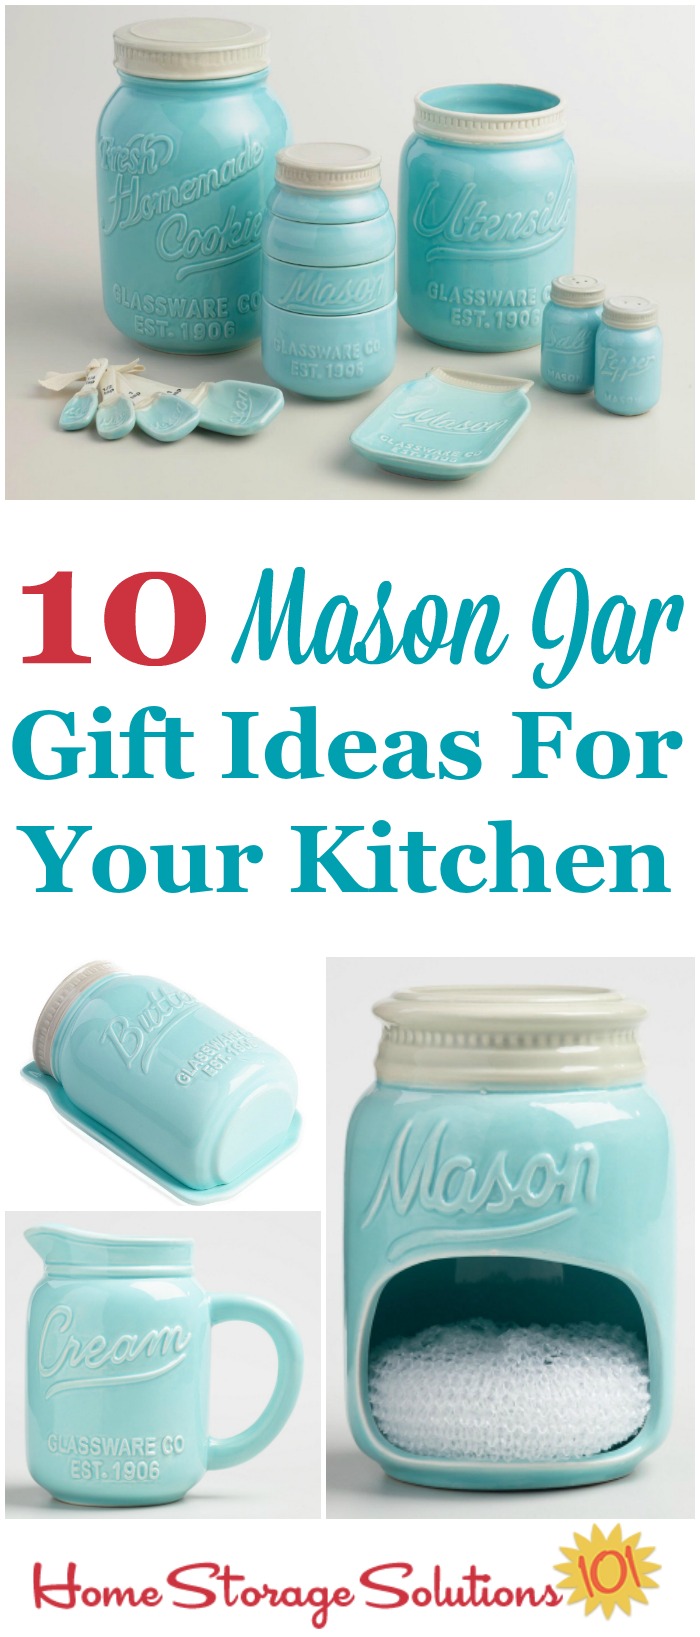 Here's a round up of 10 beautiful, useful and fun Mason Jar gift ideas for your kitchen. This is a must see for the Mason Jar lovers in your life. {featured on Home Storage Solutions 101}